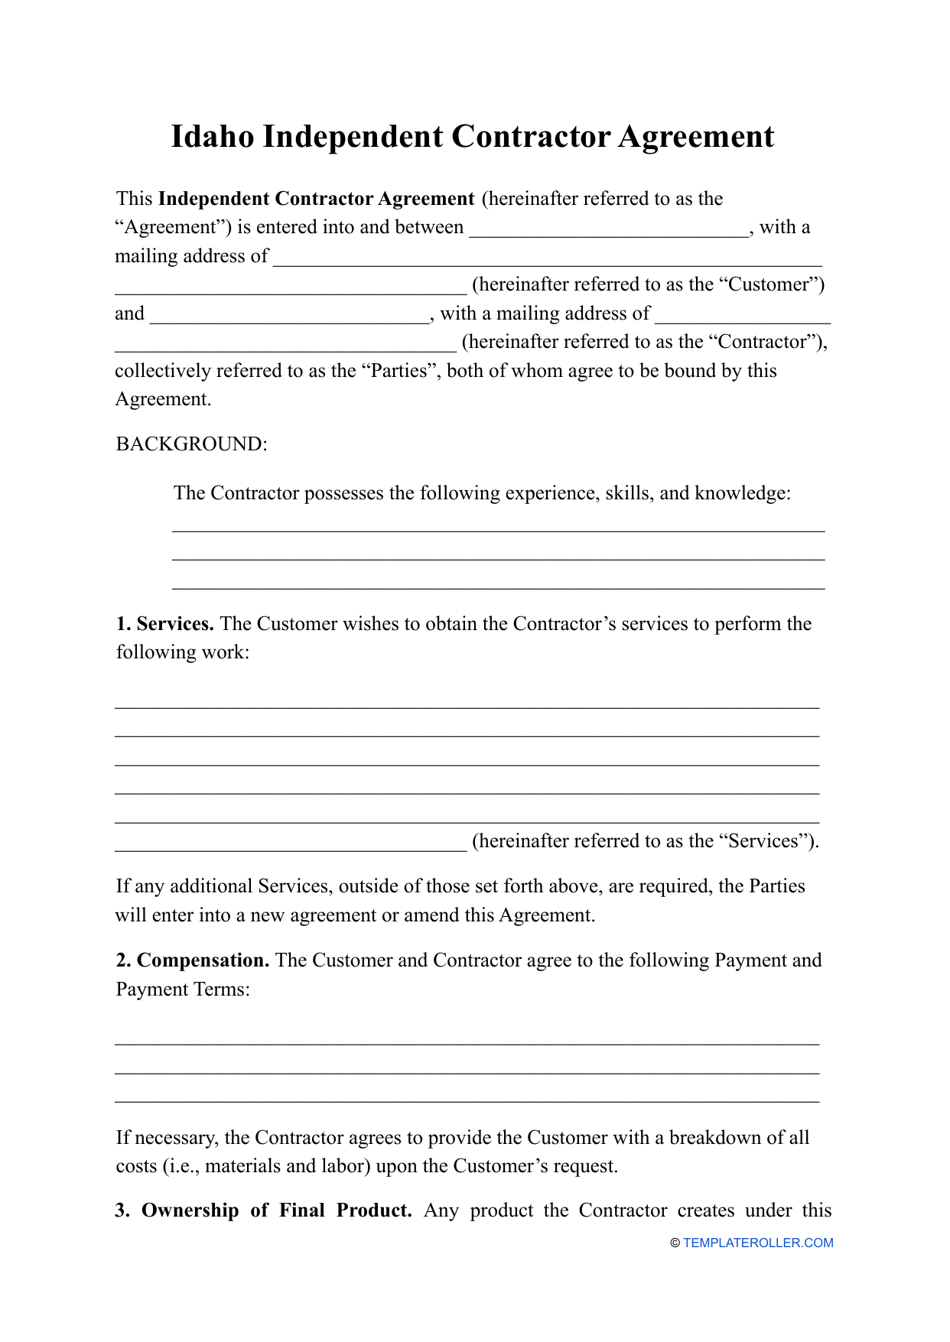 Independent Contractor Agreement Template - Idaho, Page 1